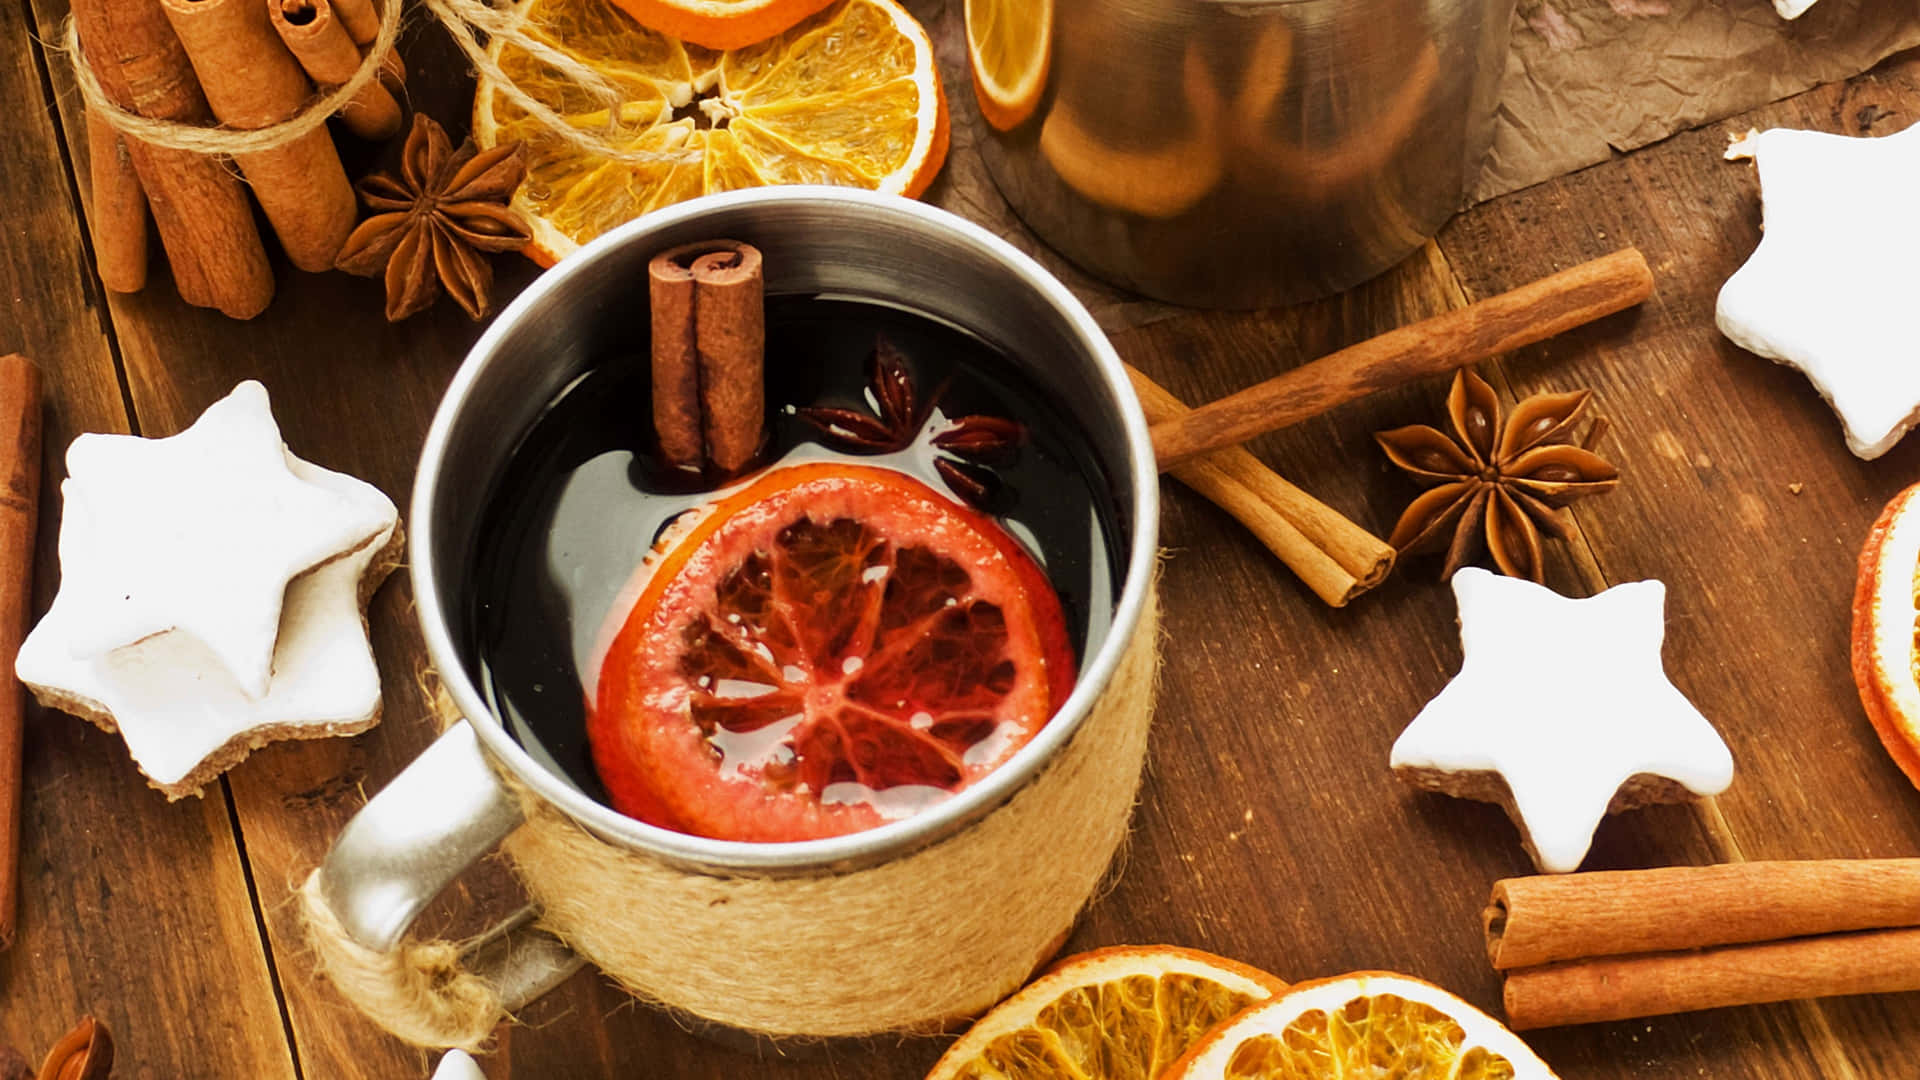 Warm and inviting mulled wine in a cozy setting Wallpaper